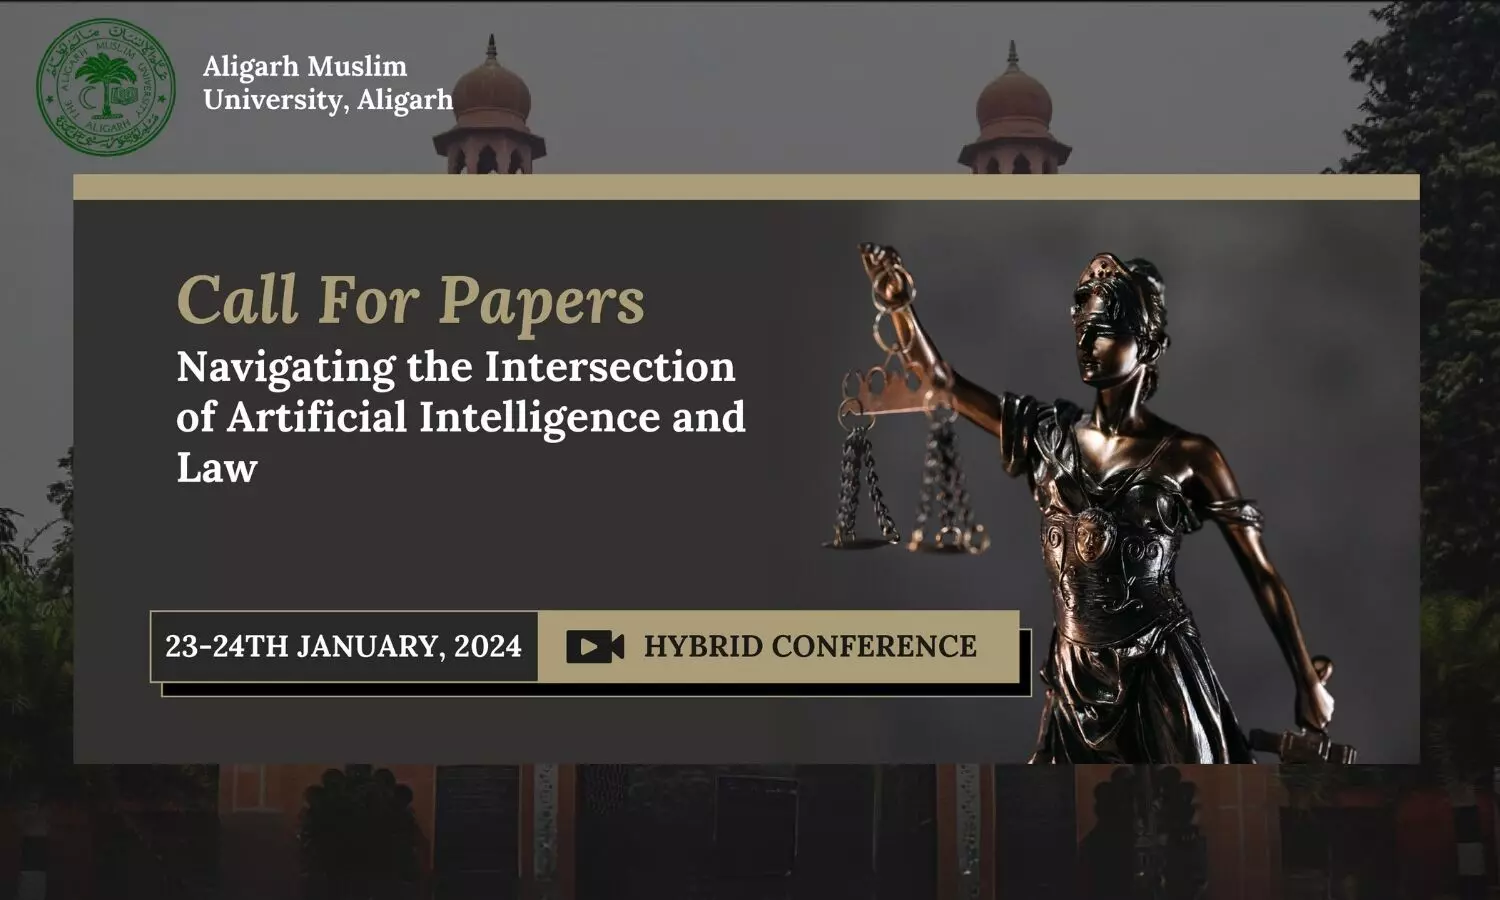 Call for Papers International Conference on Artificial Intelligence and Law 2024  Aligarh Muslim University